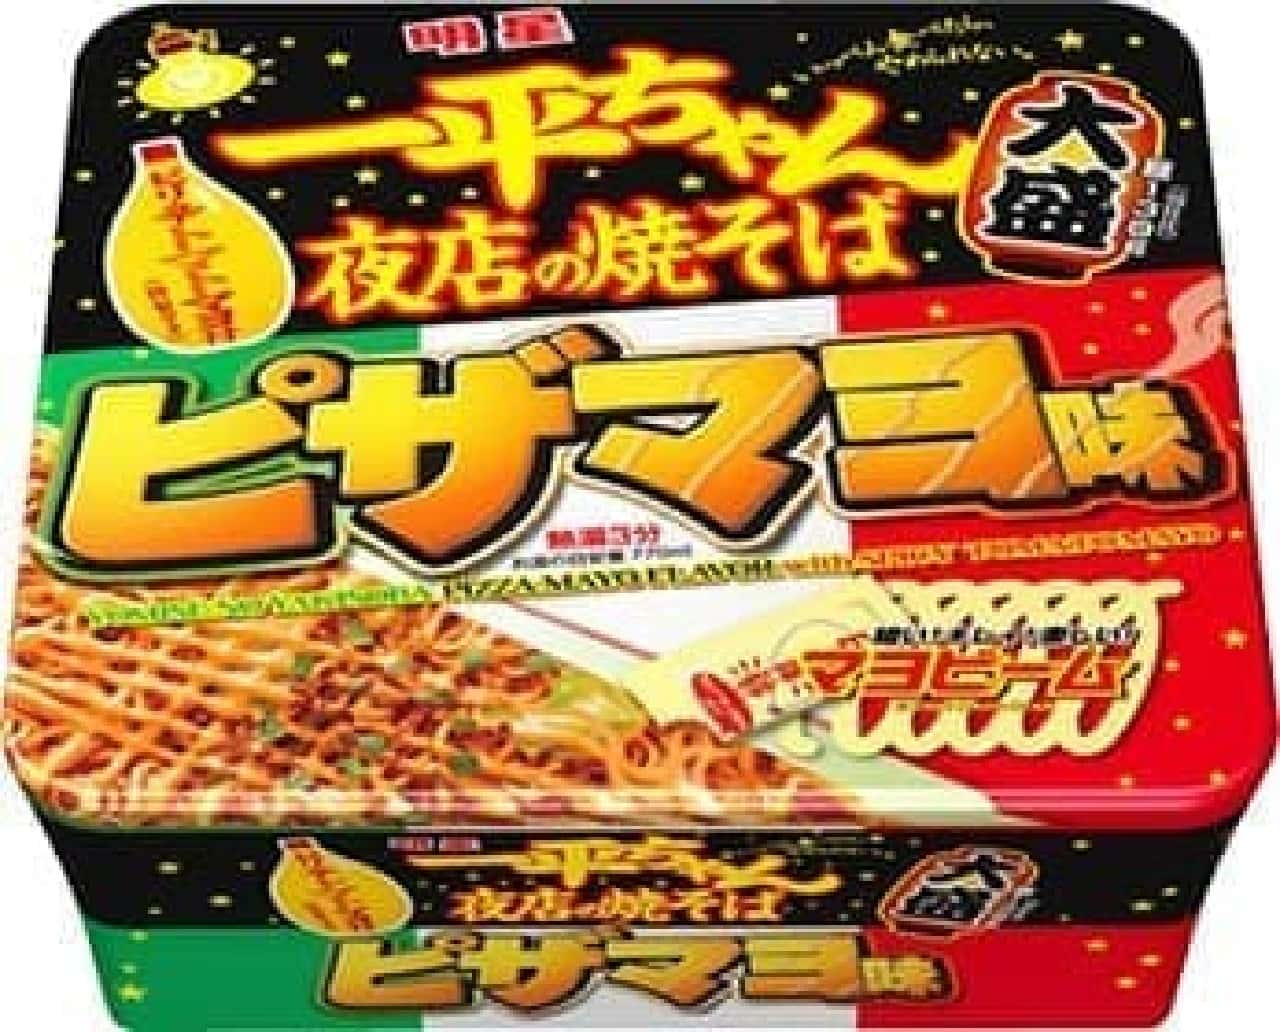 Even though it's yakisoba, it tastes like pizza !?